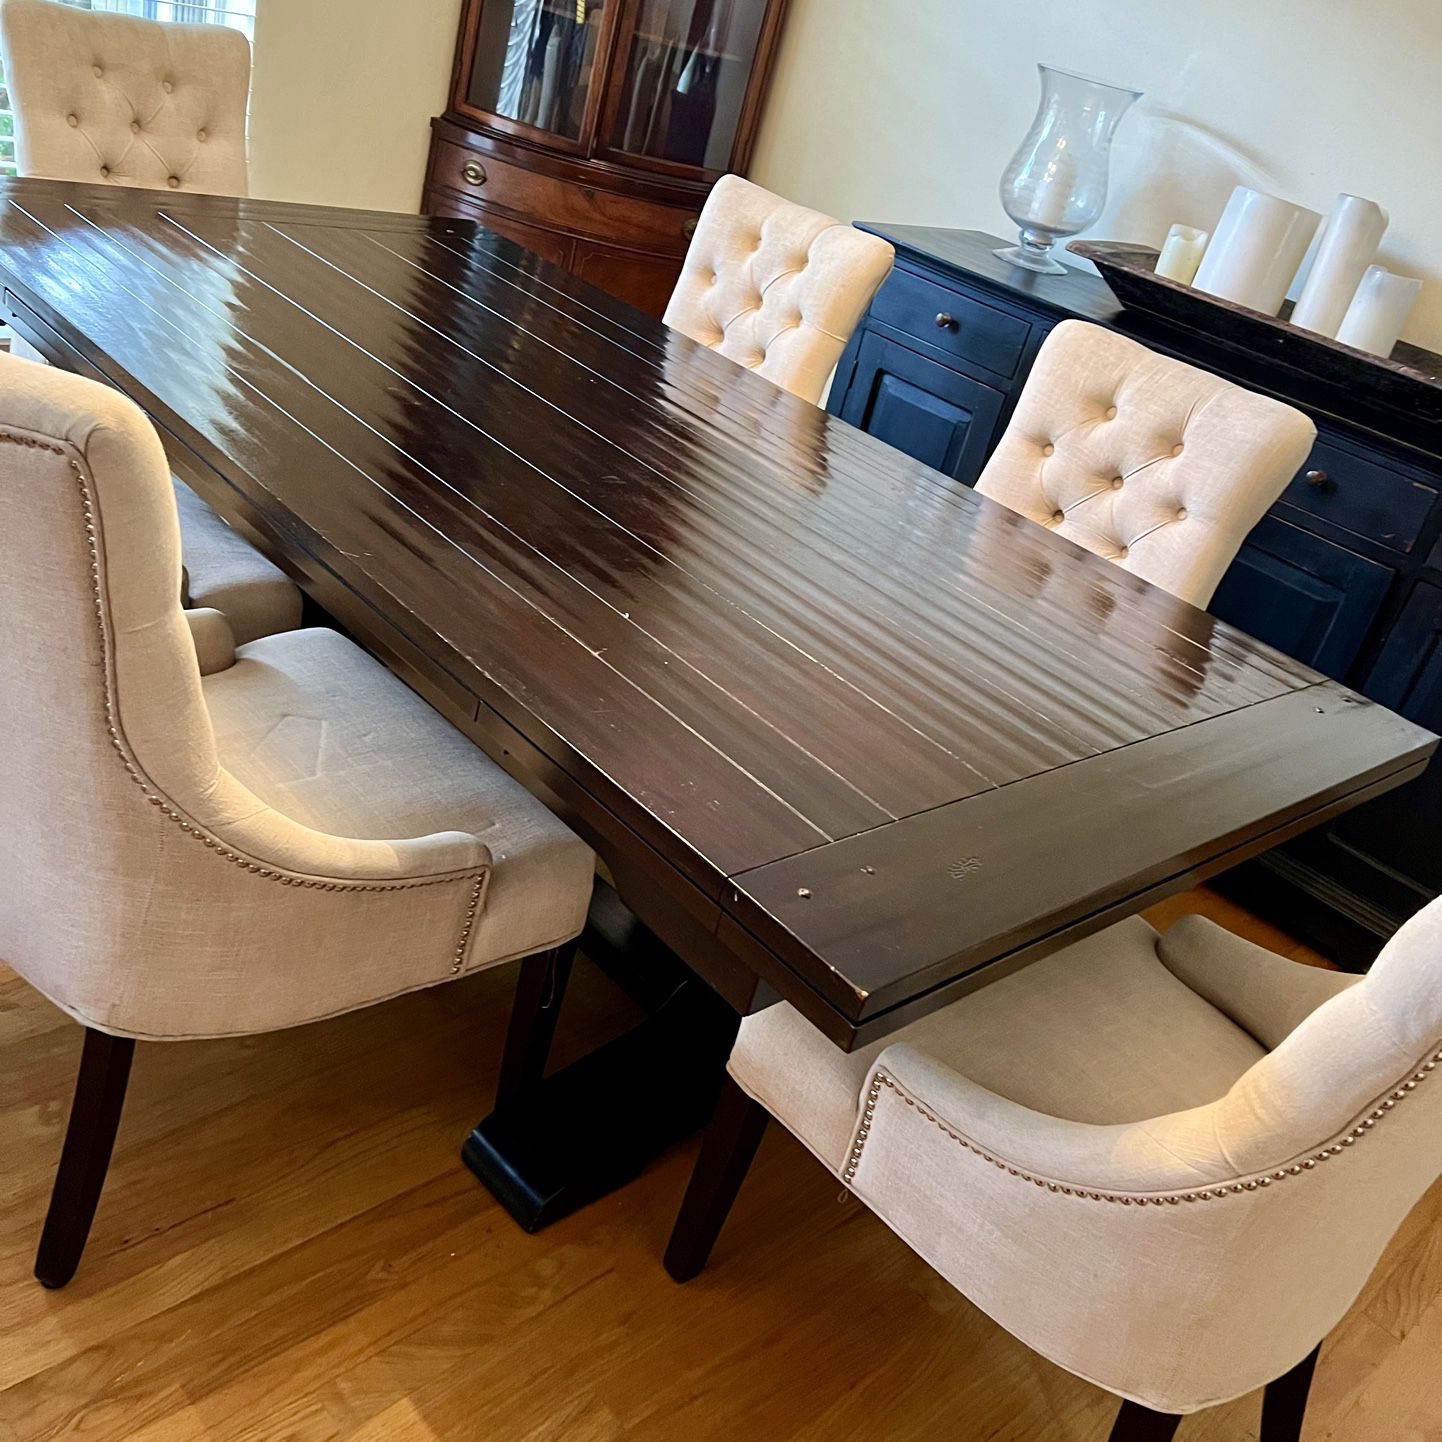 Wooden dining Room Table And 6 Chairs